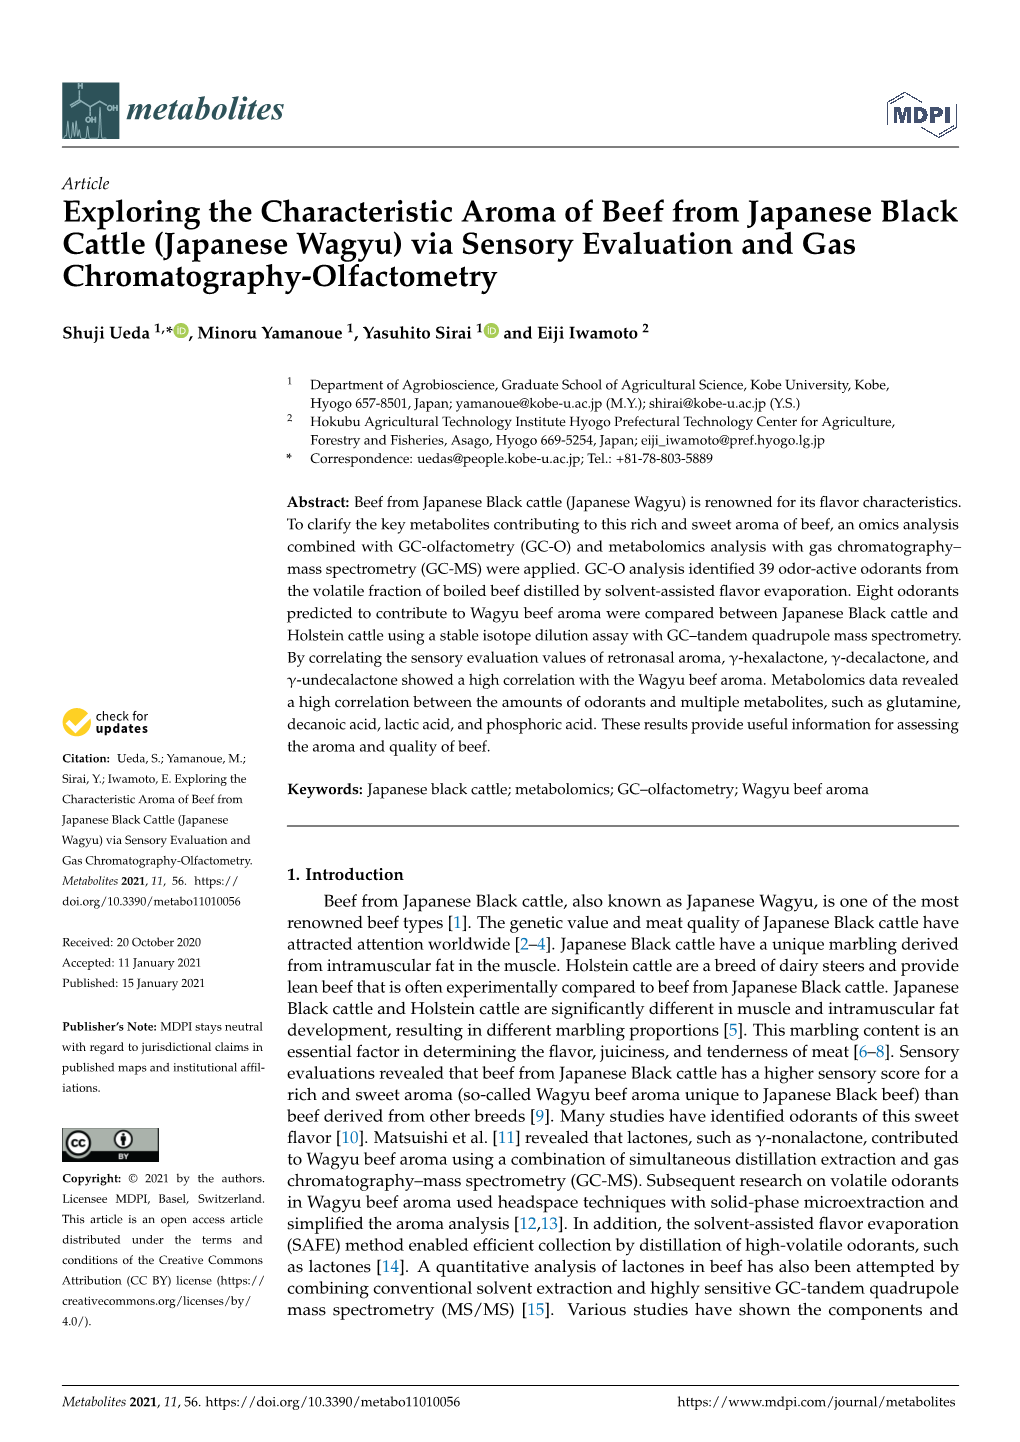 Exploring the Characteristic Aroma of Beef from Japanese Black Cattle (Japanese Wagyu) Via Sensory Evaluation and Gas Chromatography-Olfactometry